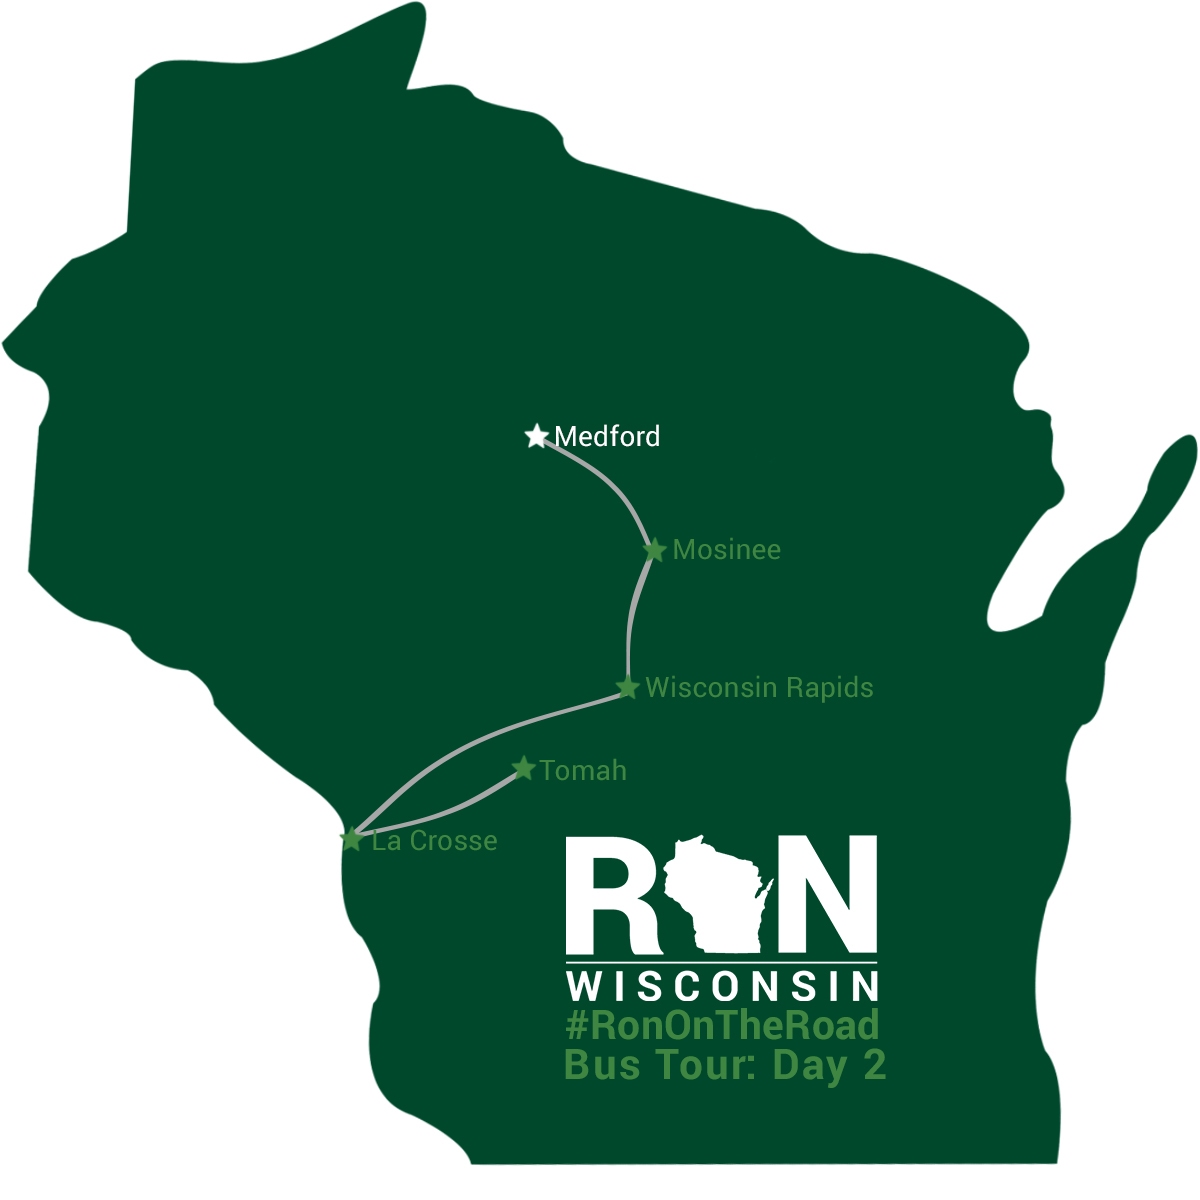 #RonOnTheRoad Bus Tour : Day 2